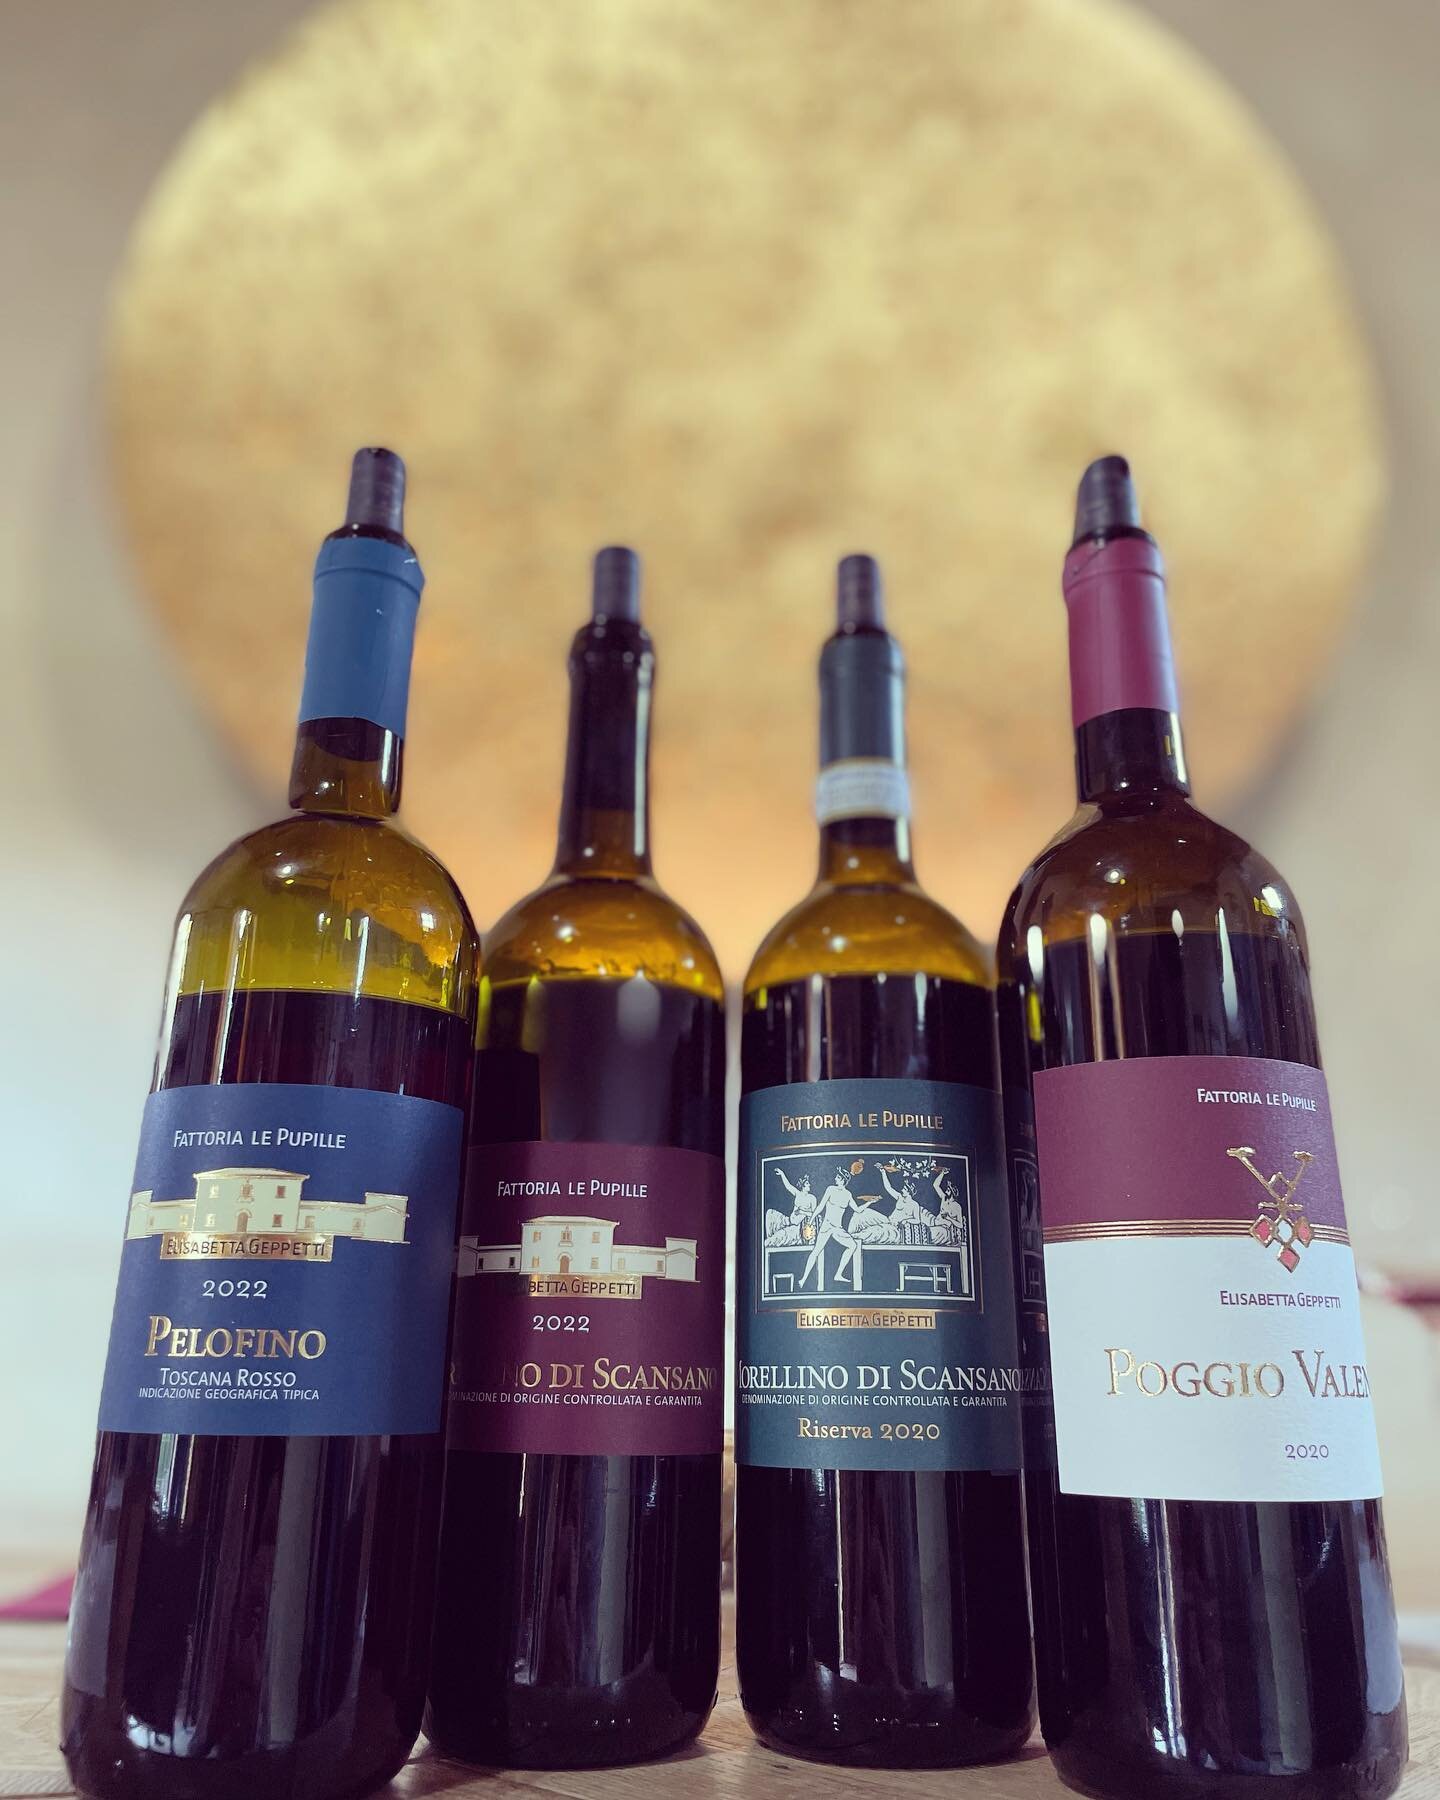 Thank you @fattorialepupille__official for welcoming some of us last week!

What a great opportunity to learn more about Morellino di Scansano DOCG. Lesser-known Appellation of Tuscany were Morellino - or Sangiovese - is the king of all grapes! 

Eli